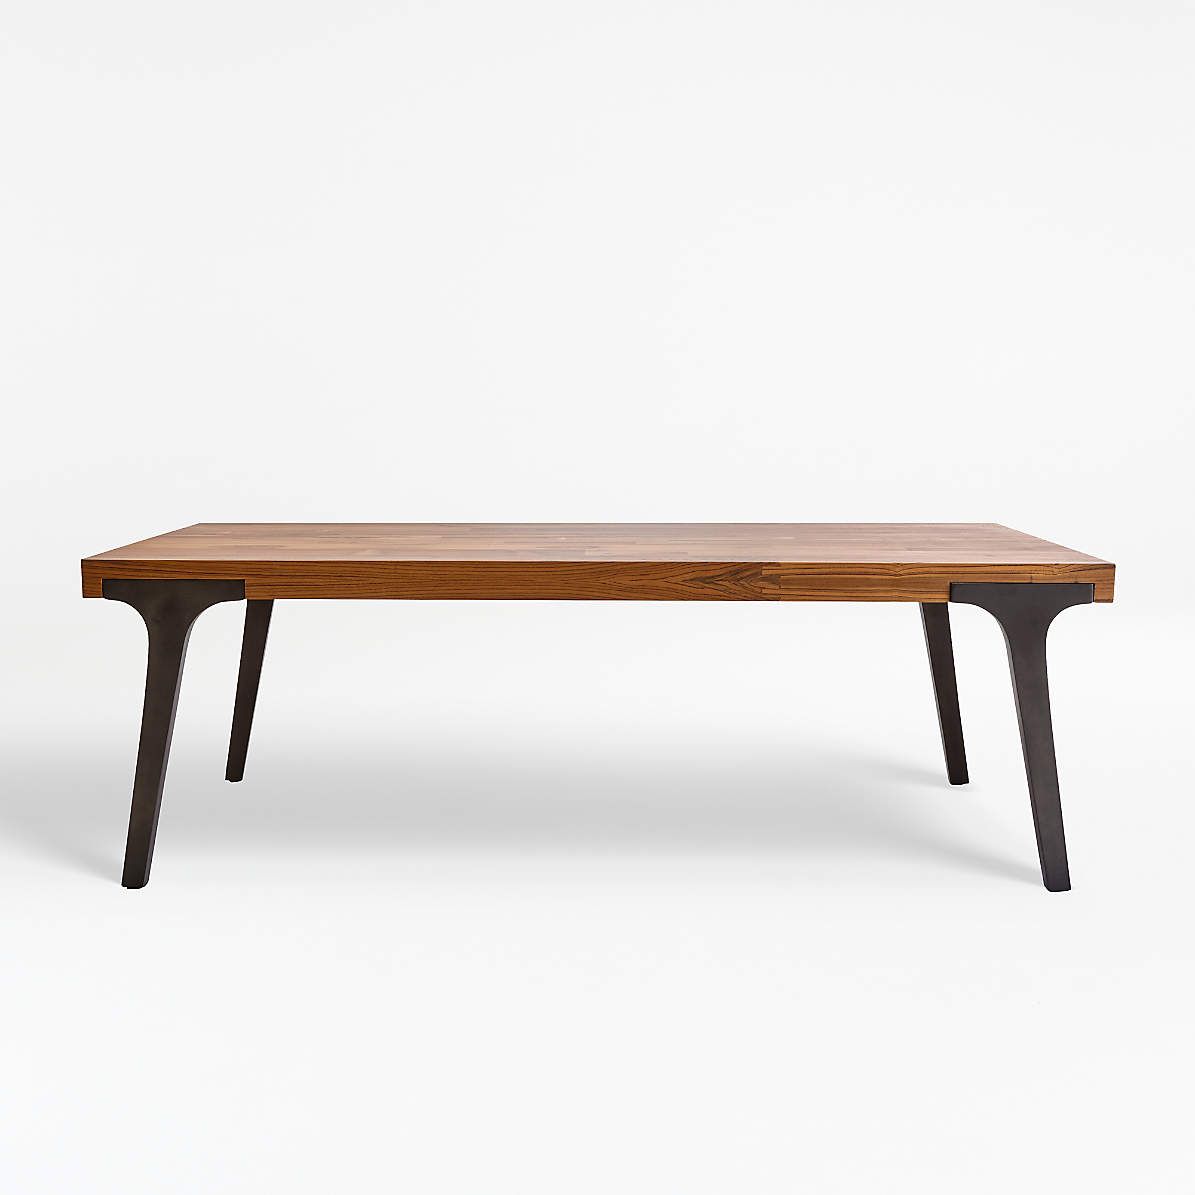 Lakin Teak Coffee Table + Reviews | Crate & Barrel For Teak Coffee Tables (View 3 of 20)